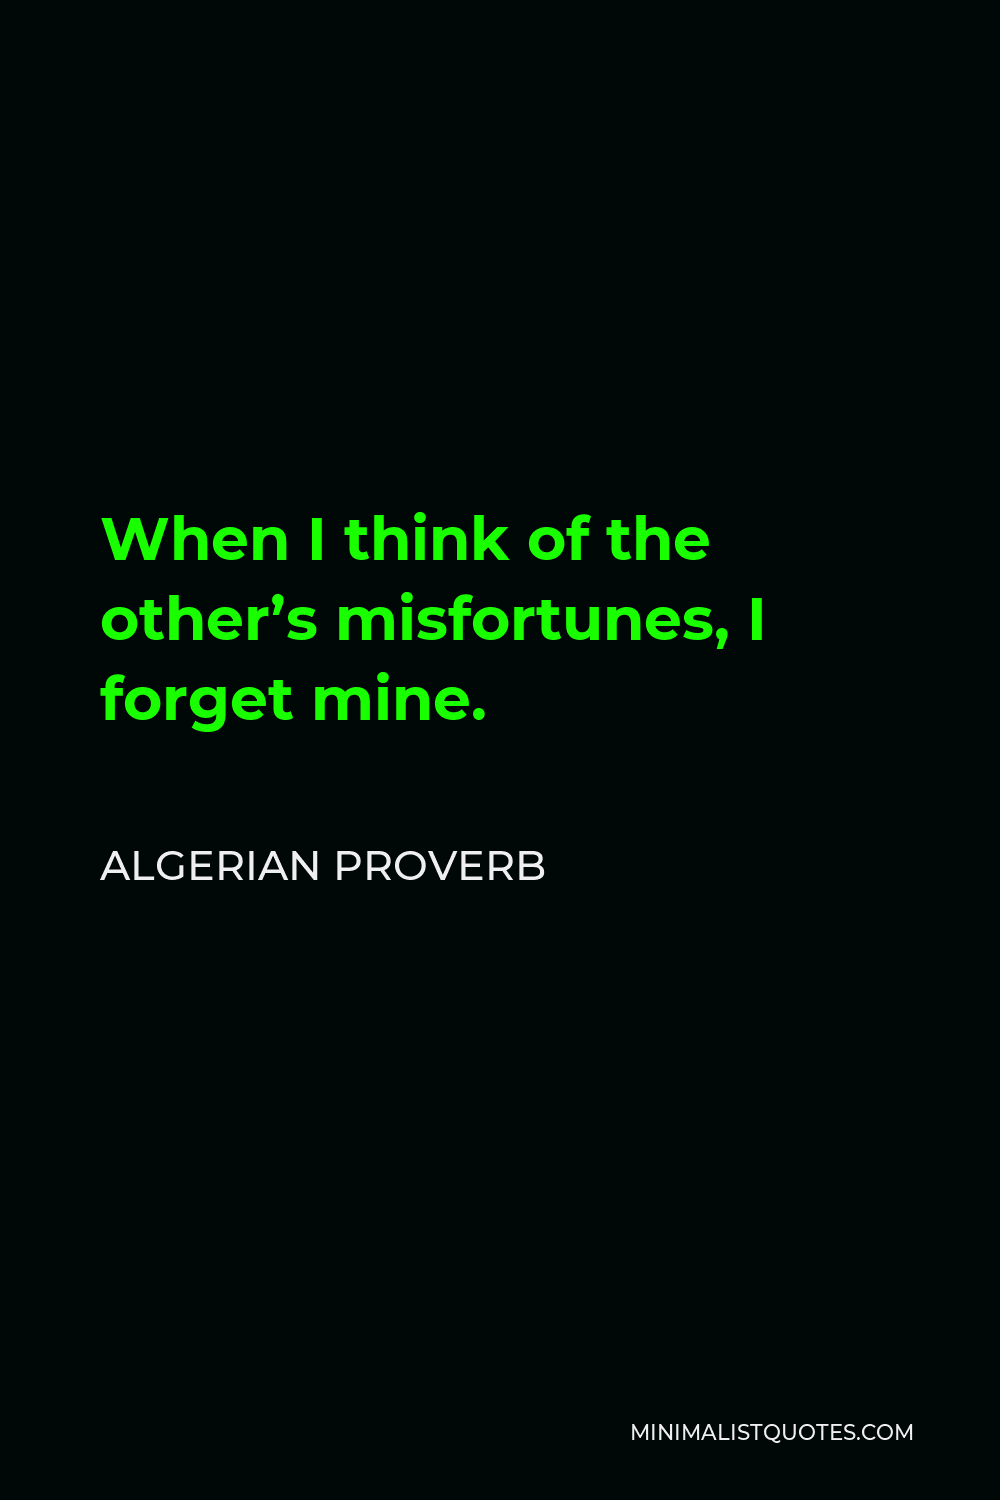 Algerian Proverb Quote - When I think of the other’s misfortunes, I forget mine.